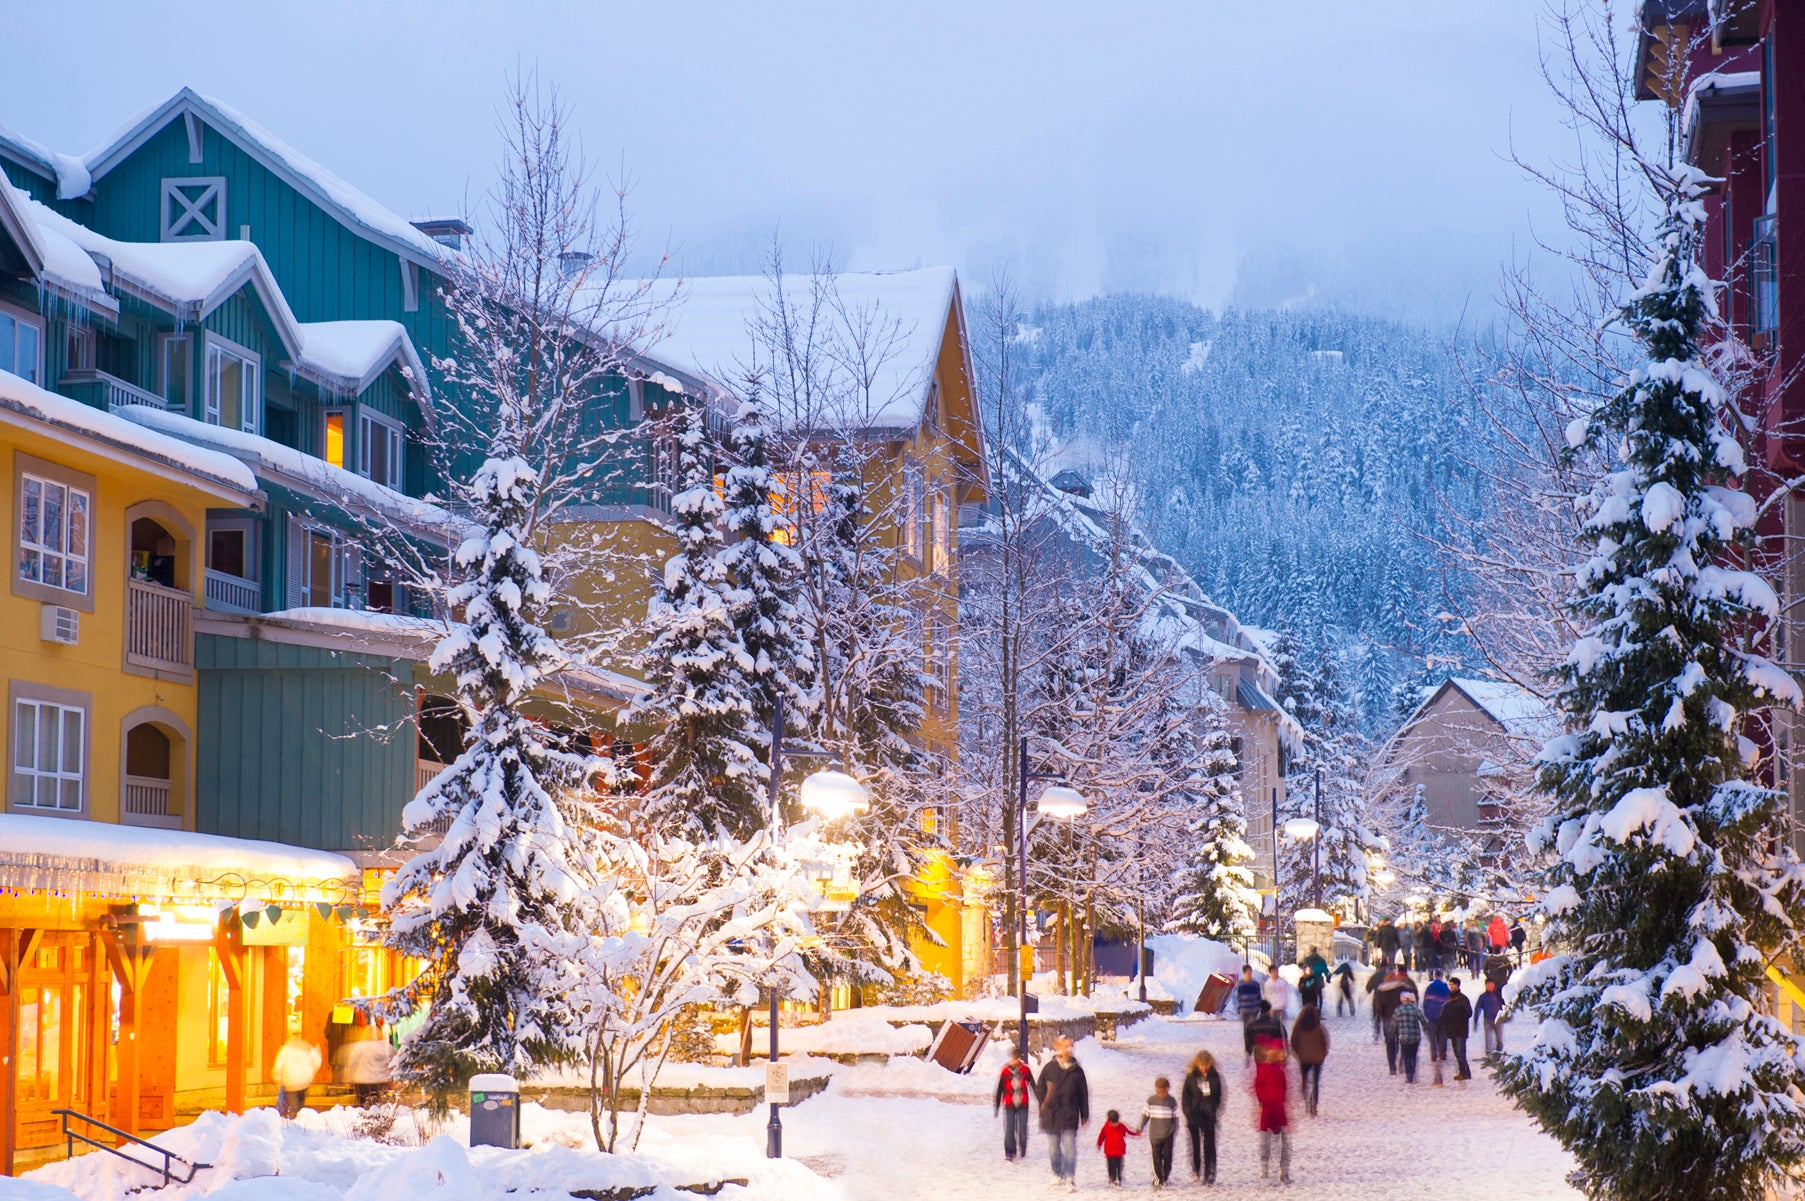 Whistler is one of North America’s most popular ski resorts